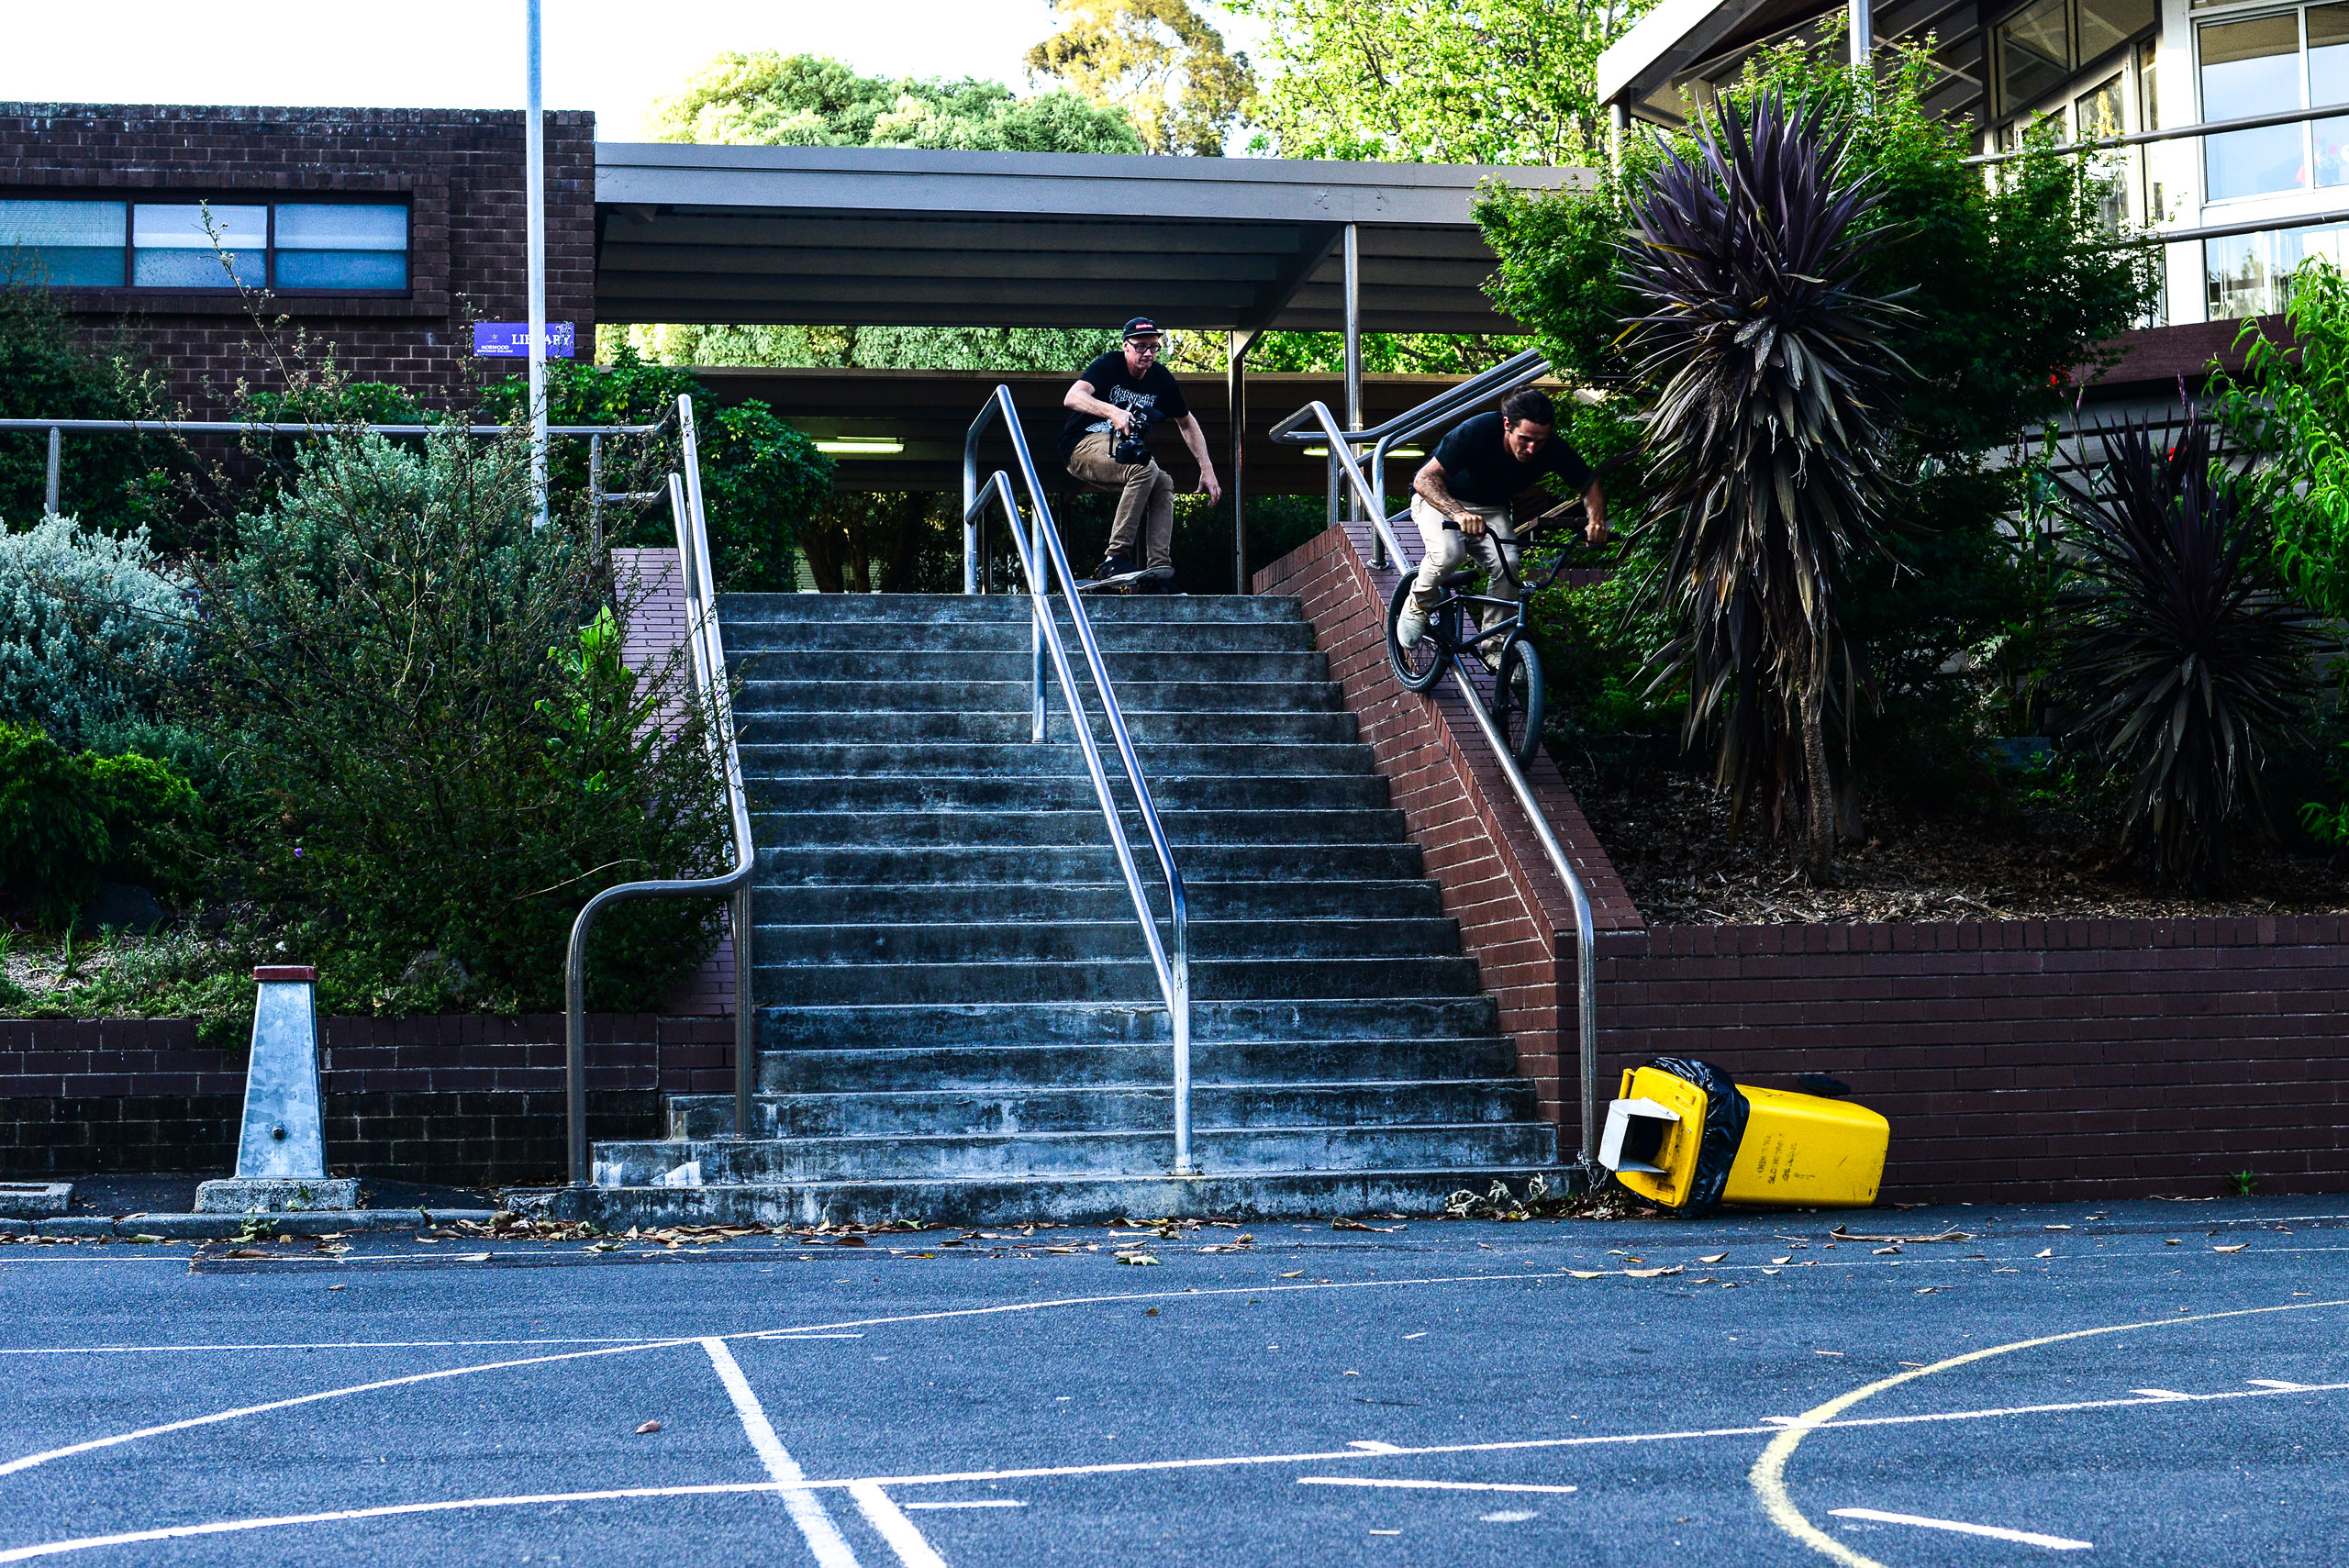 Zac Miner is a beast! This is one of those spots that when something gets done on it, it goes down in local history. No photo or video will ever do this justice. Shot by Lachy Swanton.